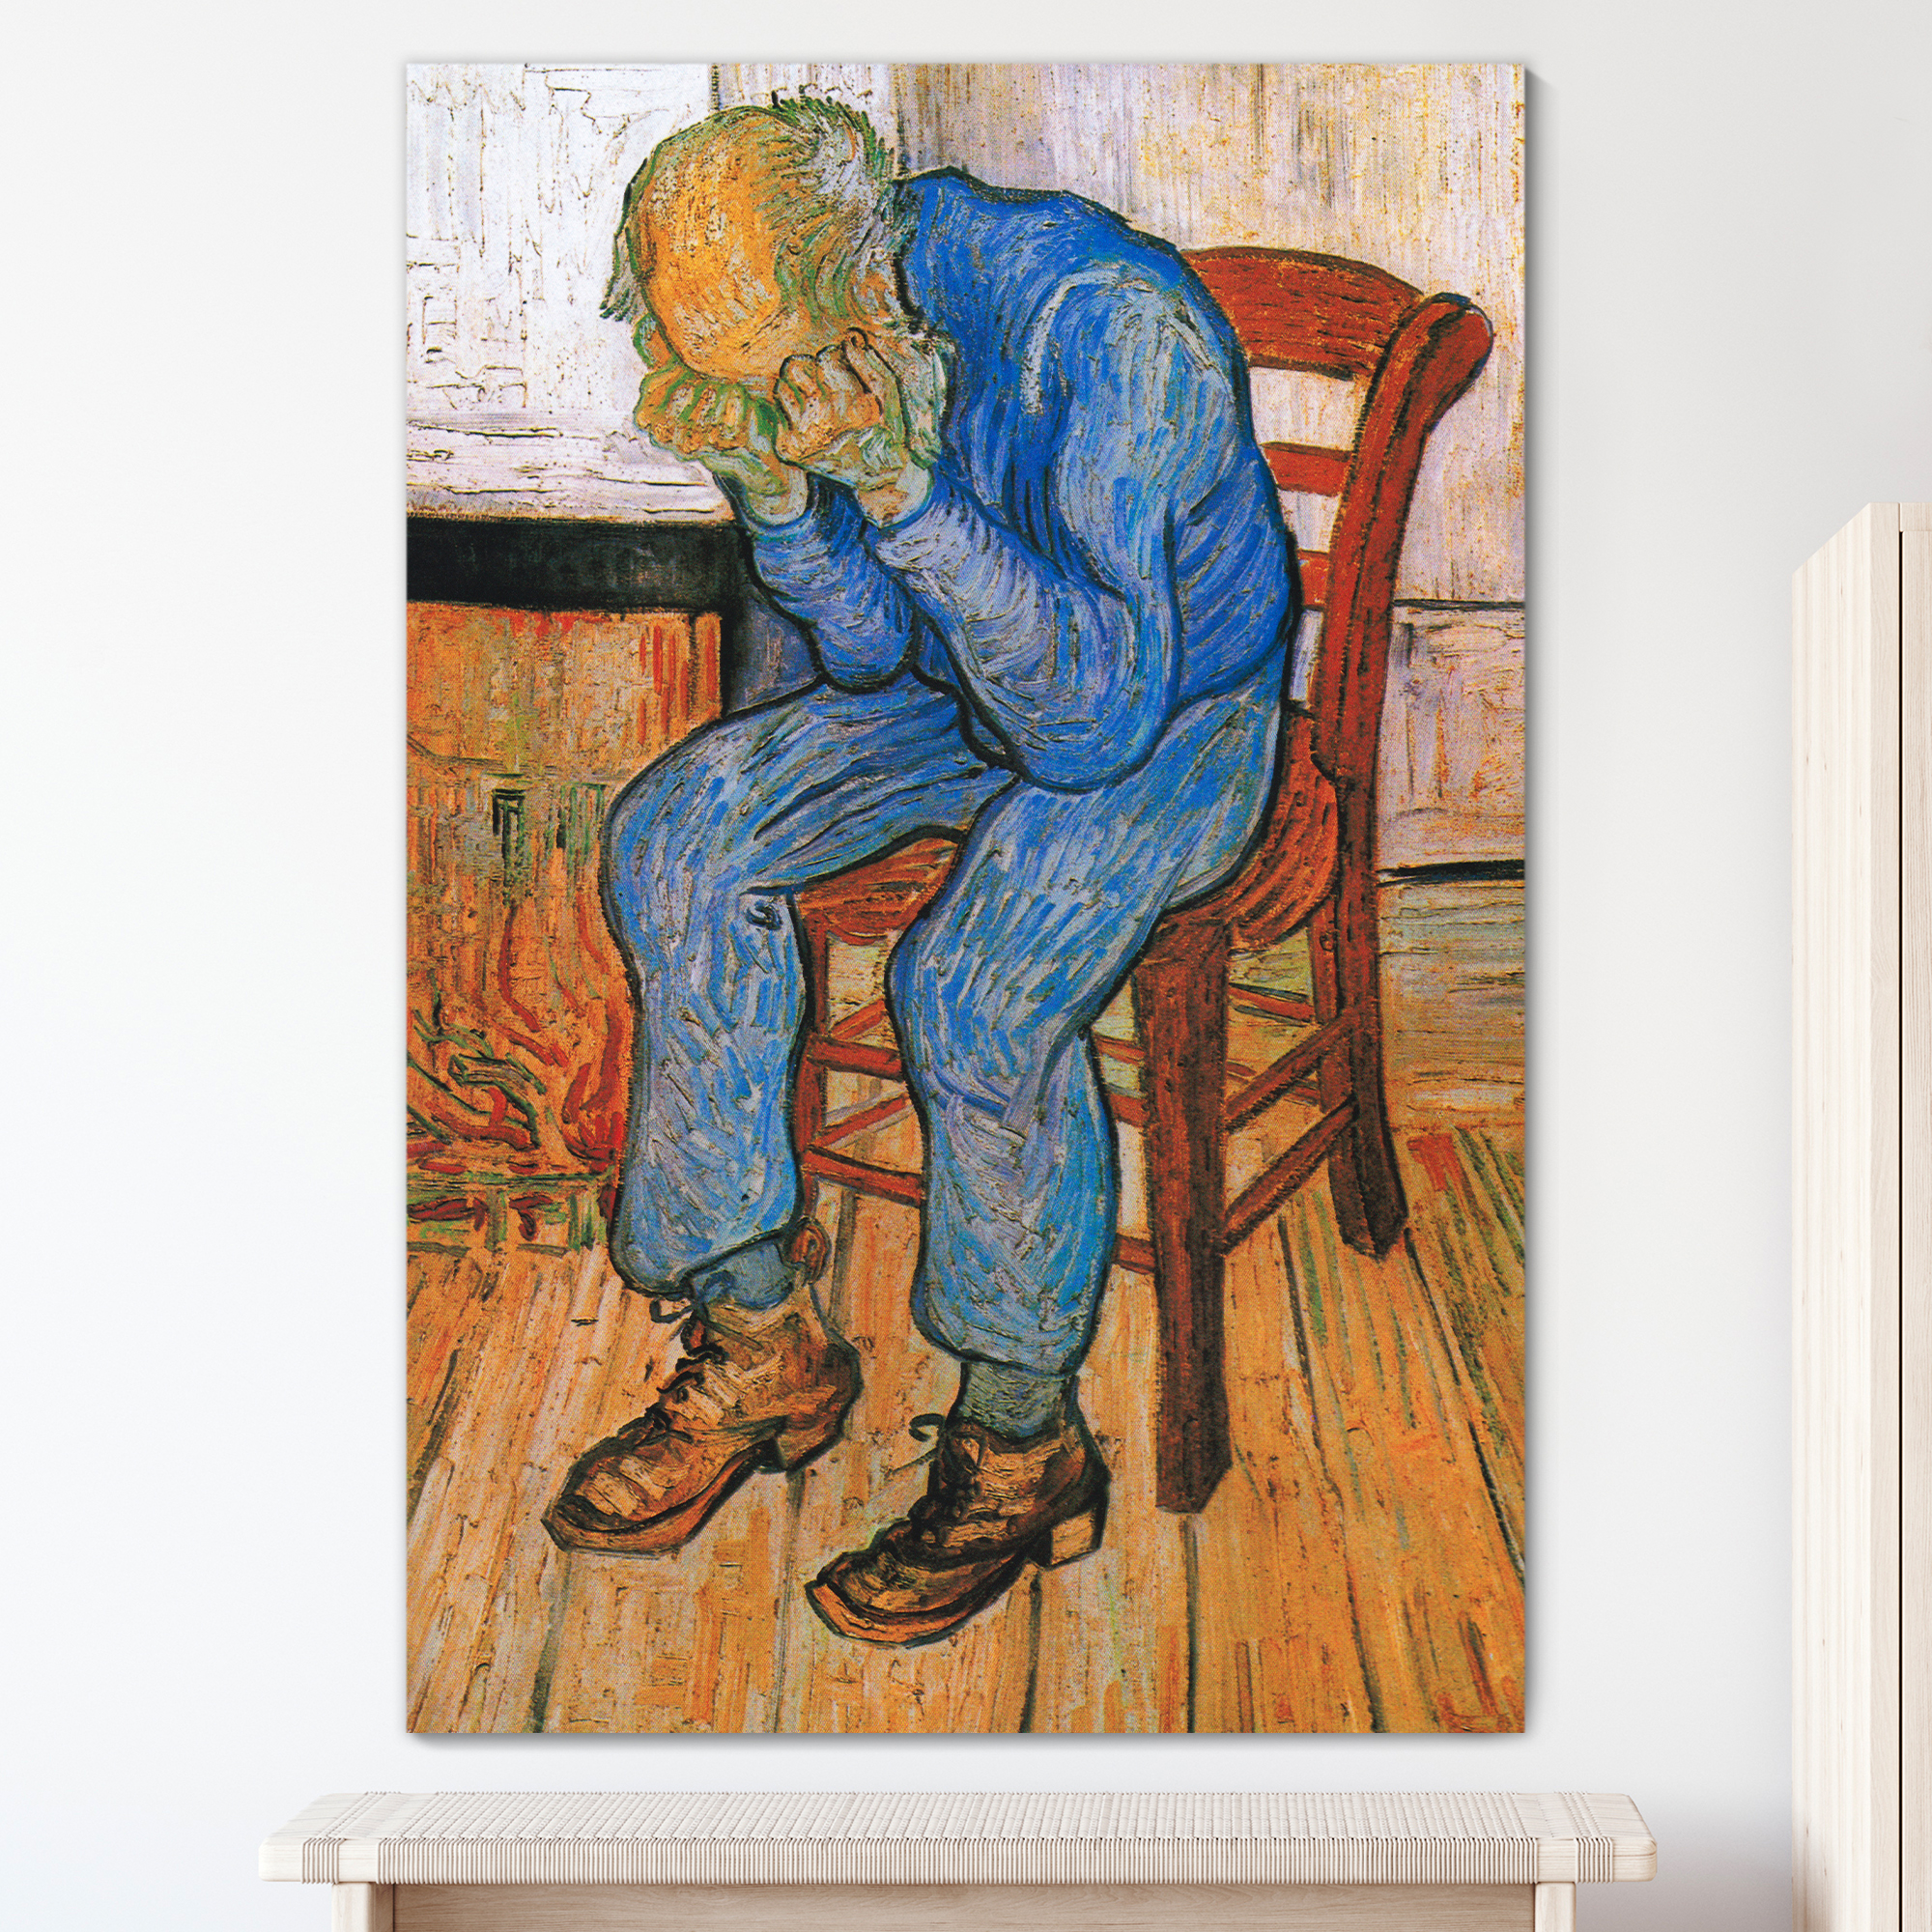 At Eternity's Gate (Sorrowing Old Man) Vincent Van Gogh - Oil Painting Reproduction on Canvas Prints Wall Art, Ready to Hang - 16x24 inches